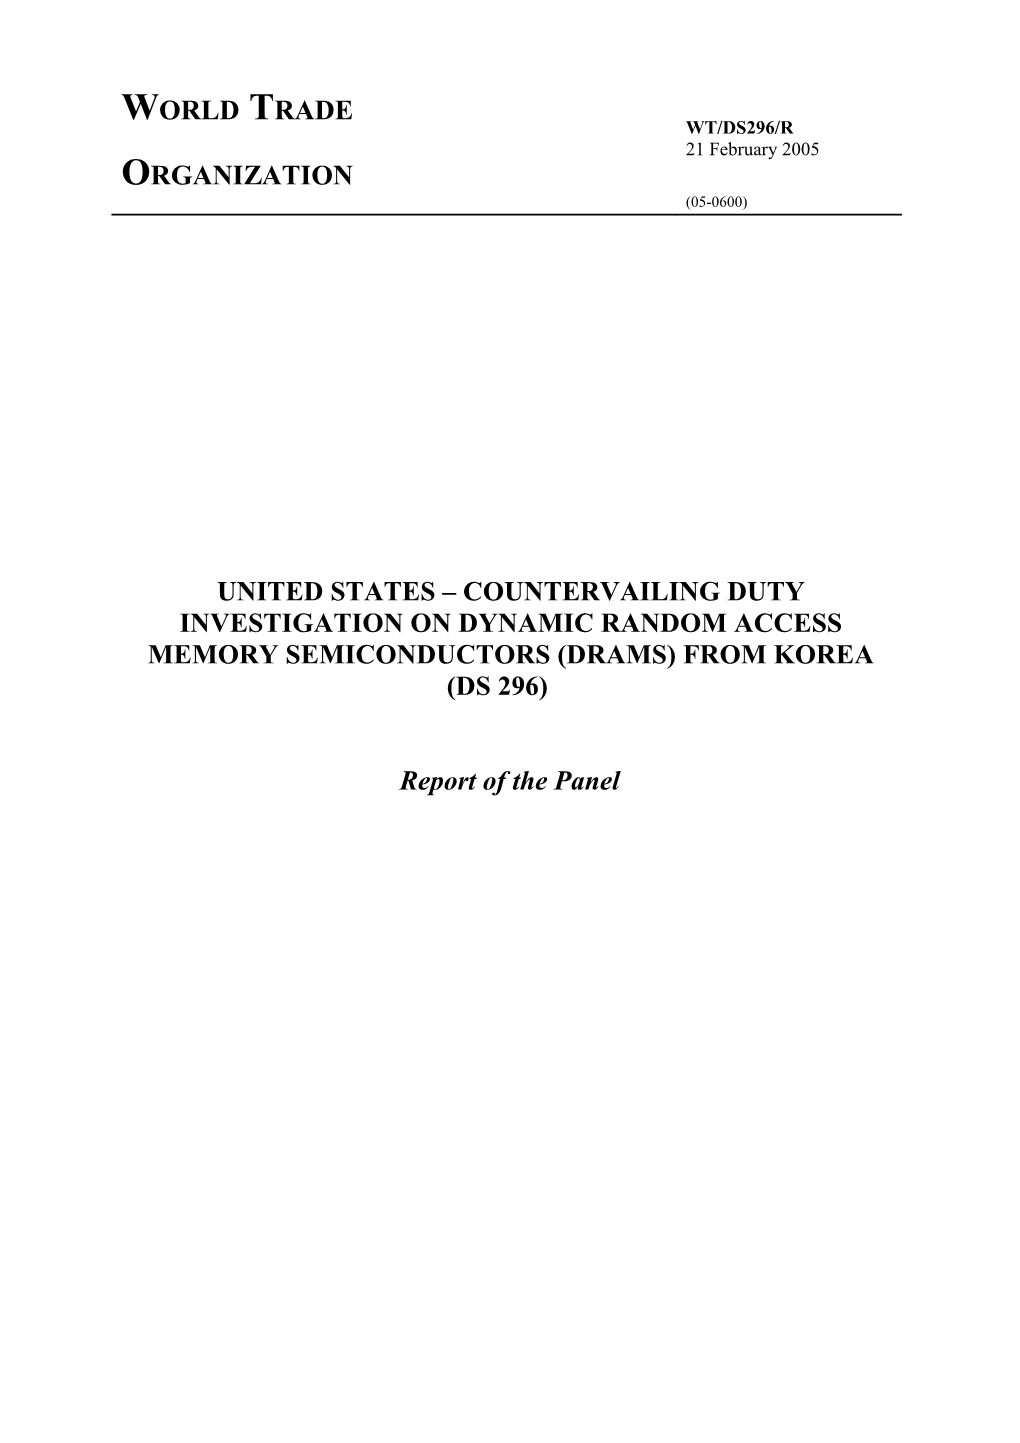 United States Countervailing Duty Investigation on Dynamic Random Access Memory Semiconductors